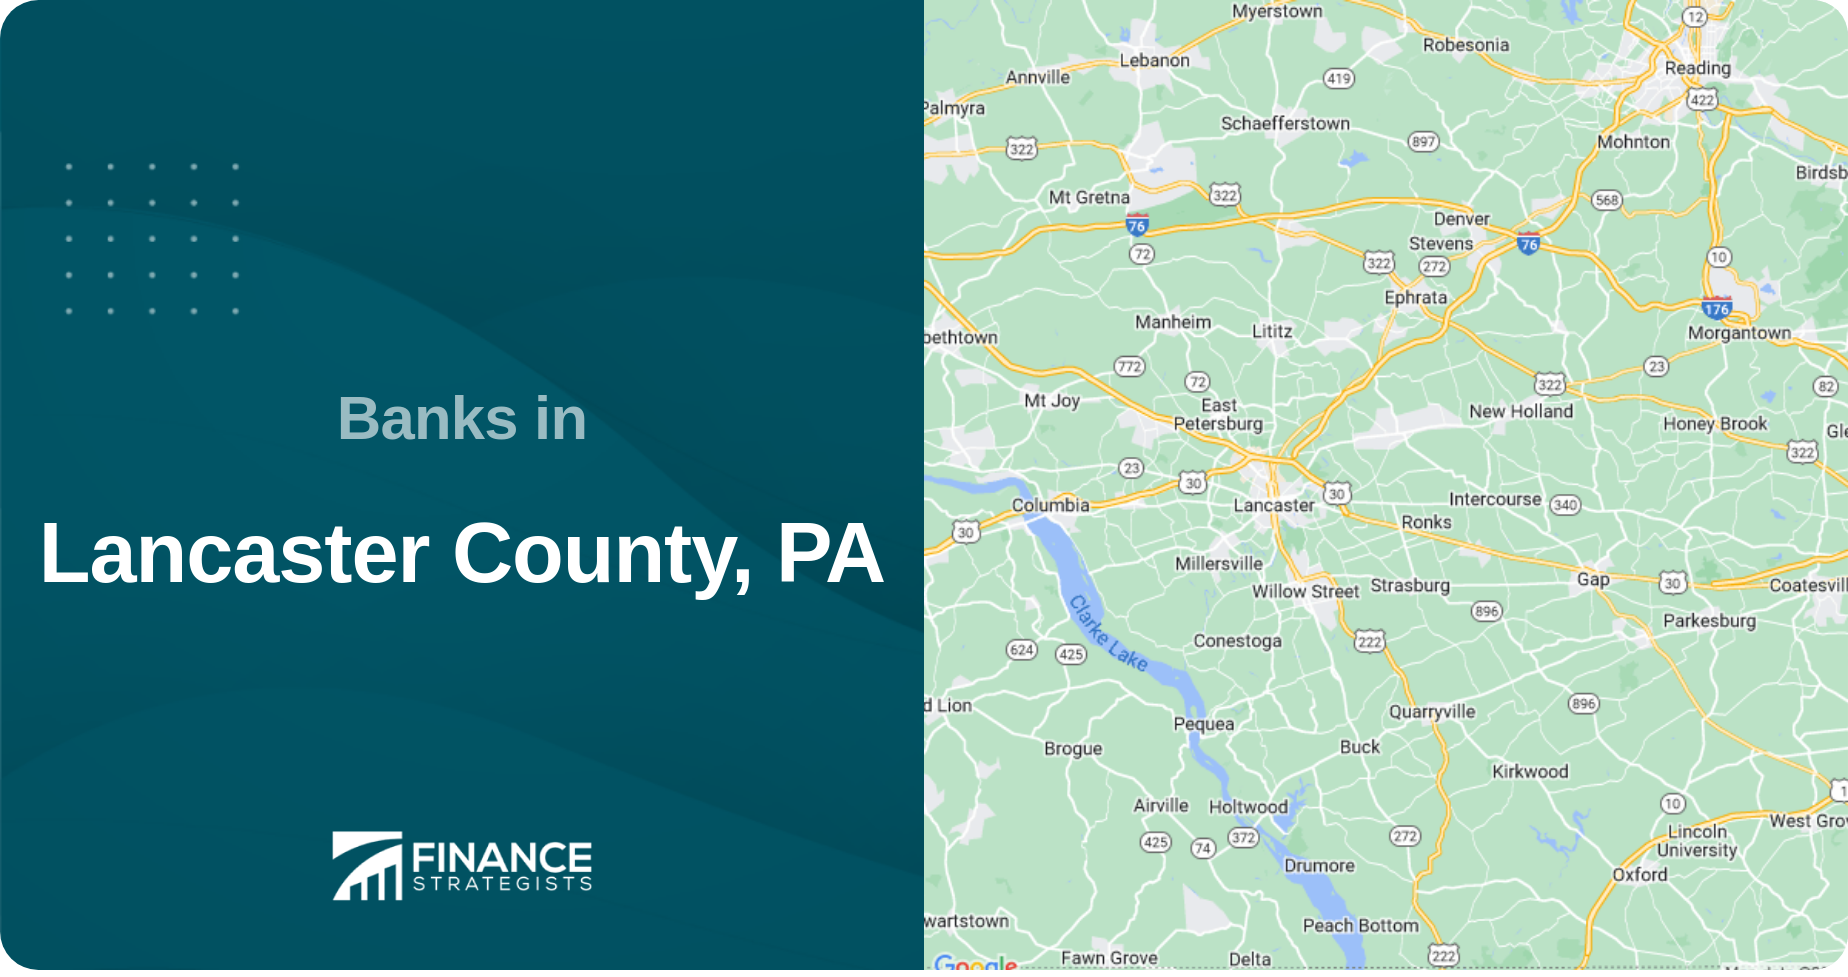 Banks in Lancaster County, PA